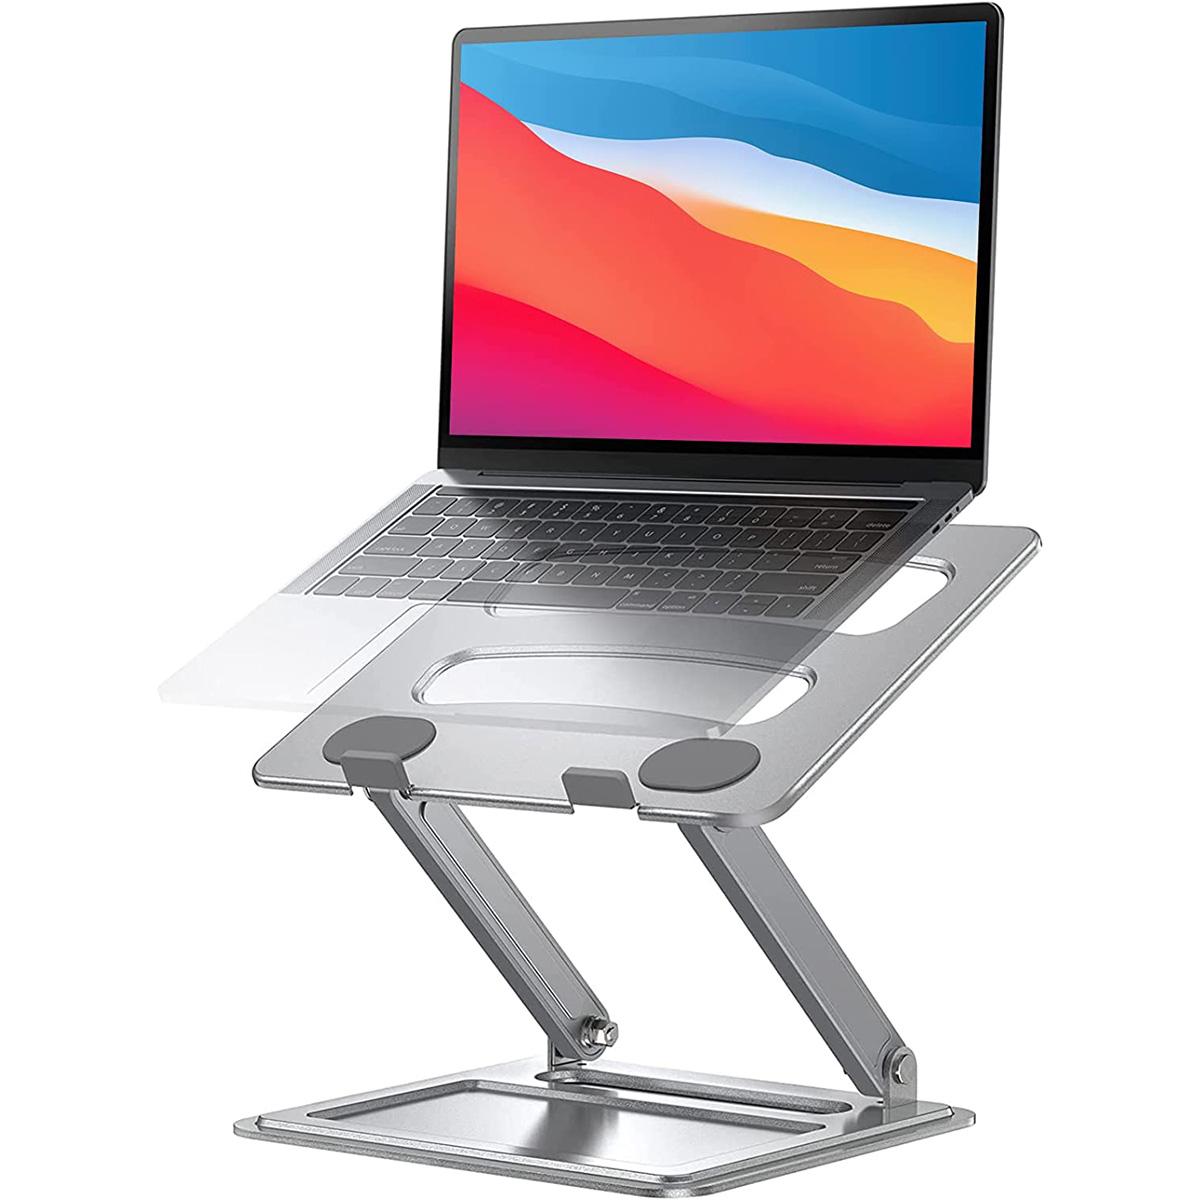 Adjustable Portable Laptop Stand for $12.36